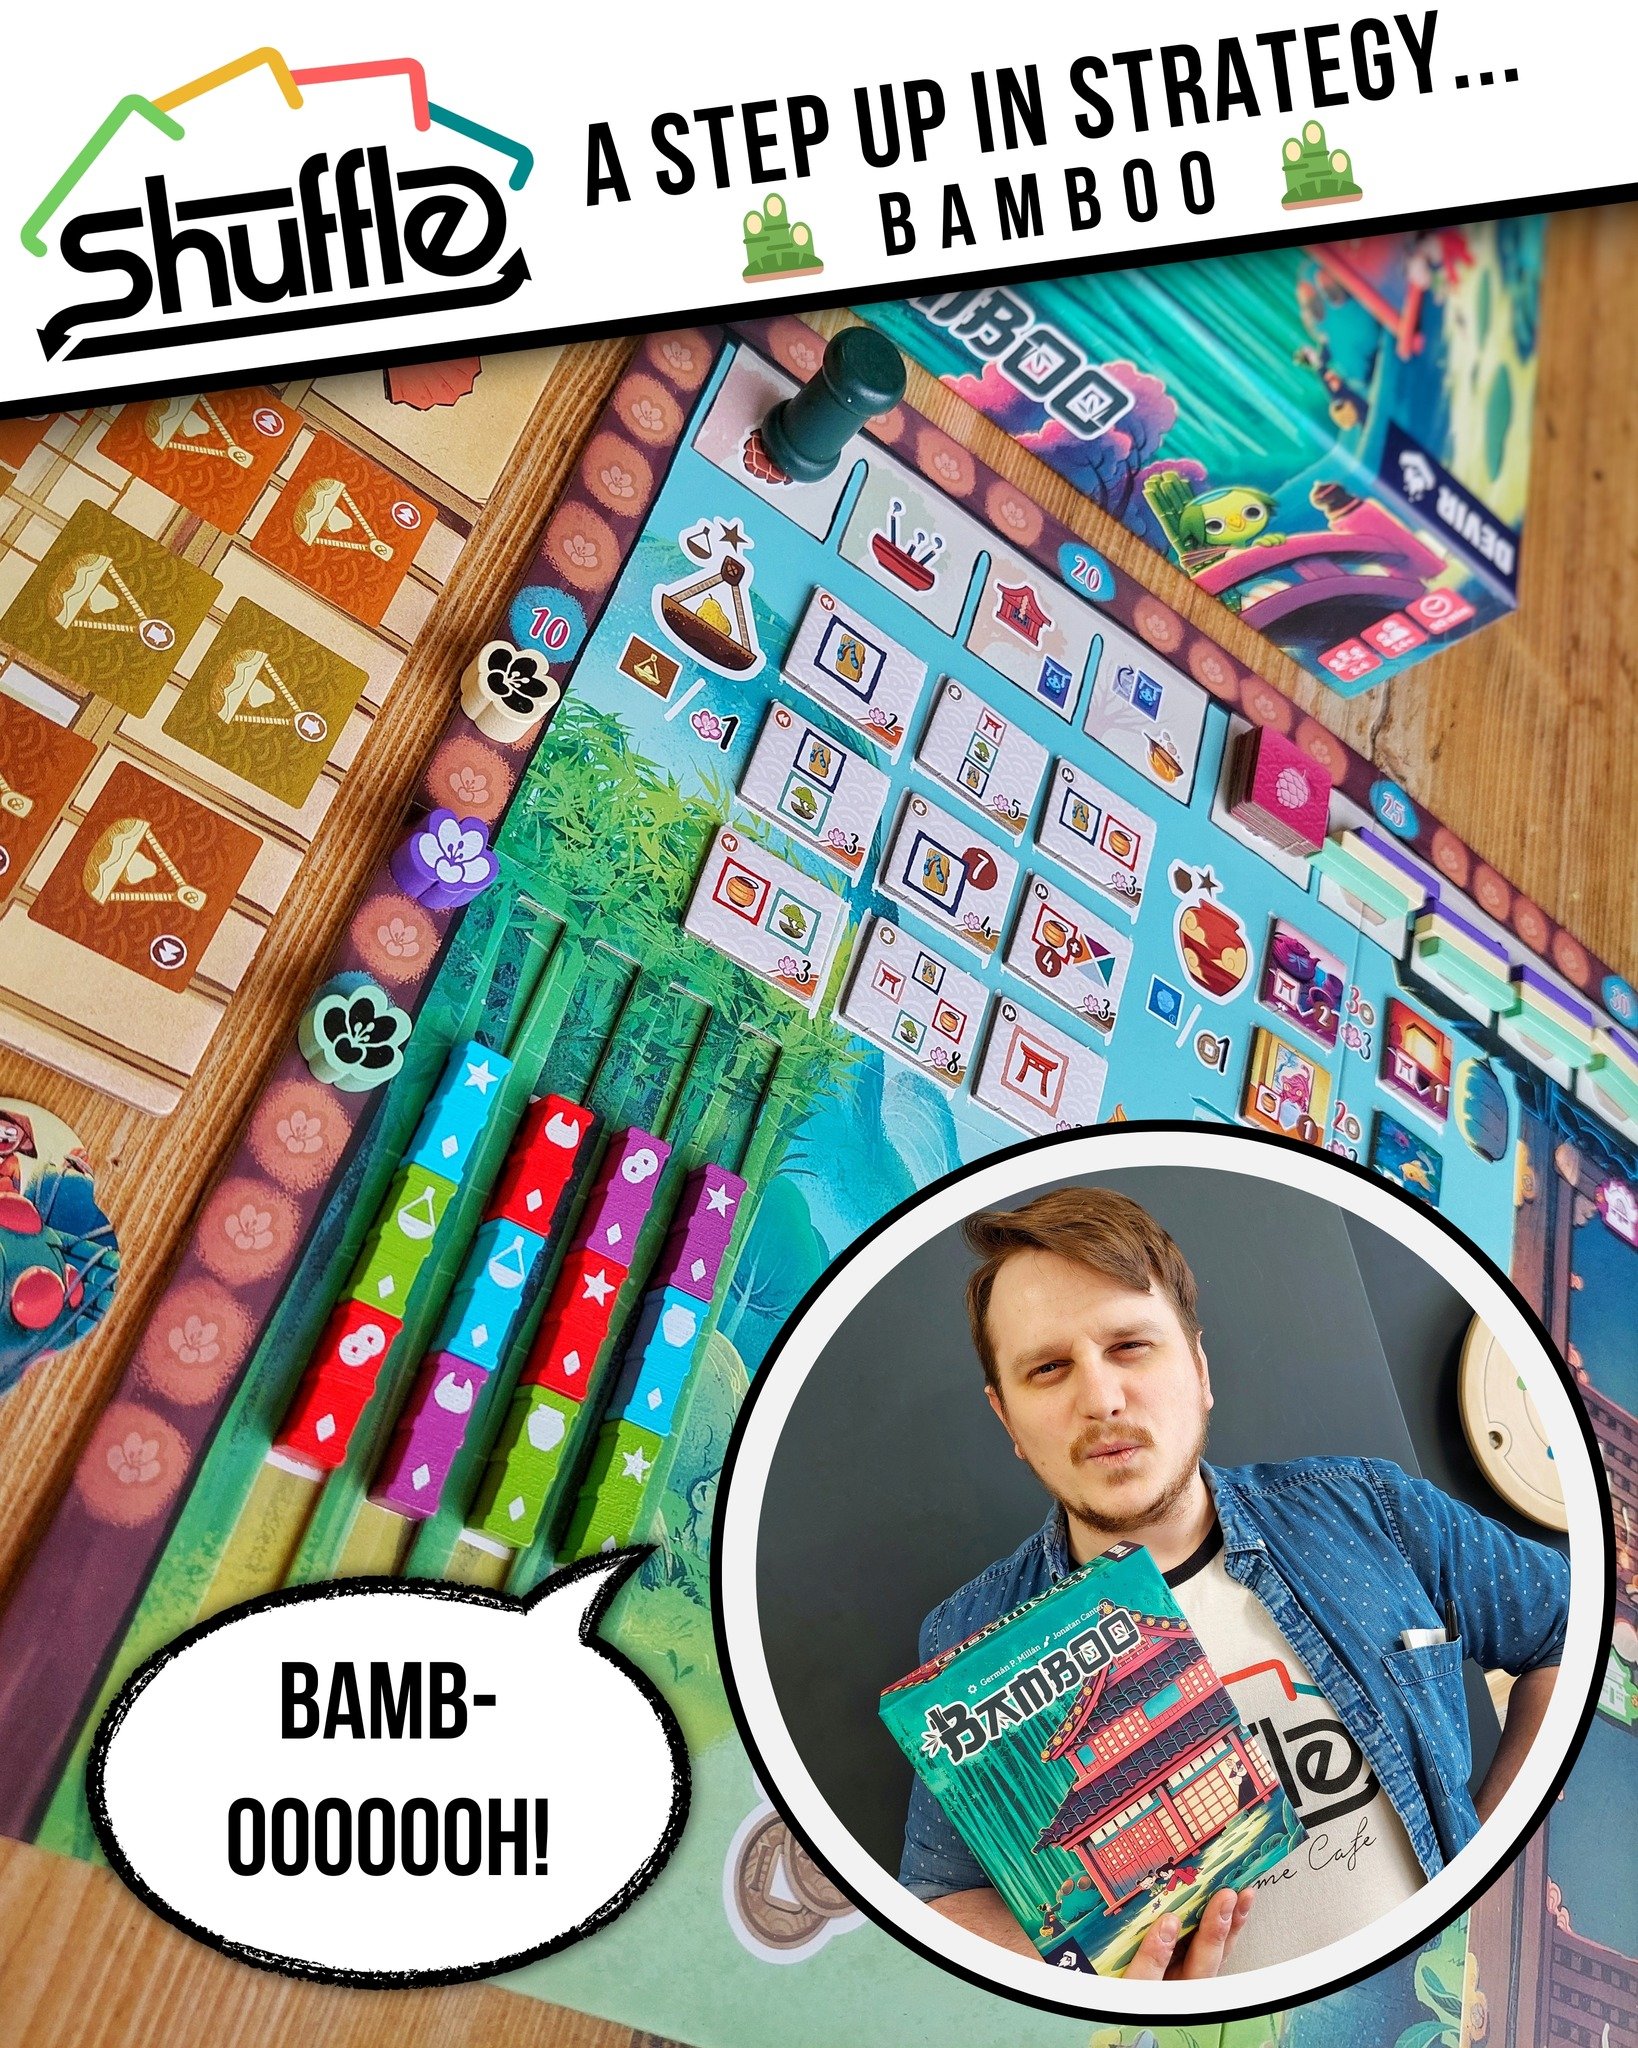 New into Shuffle's board game library: BAMBOO! 🎍 Joash is rather excited to see this one, hence his &quot;OooOOooHhh!&quot; face!

In Bamboo, 2-4 players take on the role of different clans that grow bamboo... and use it to take care of their family